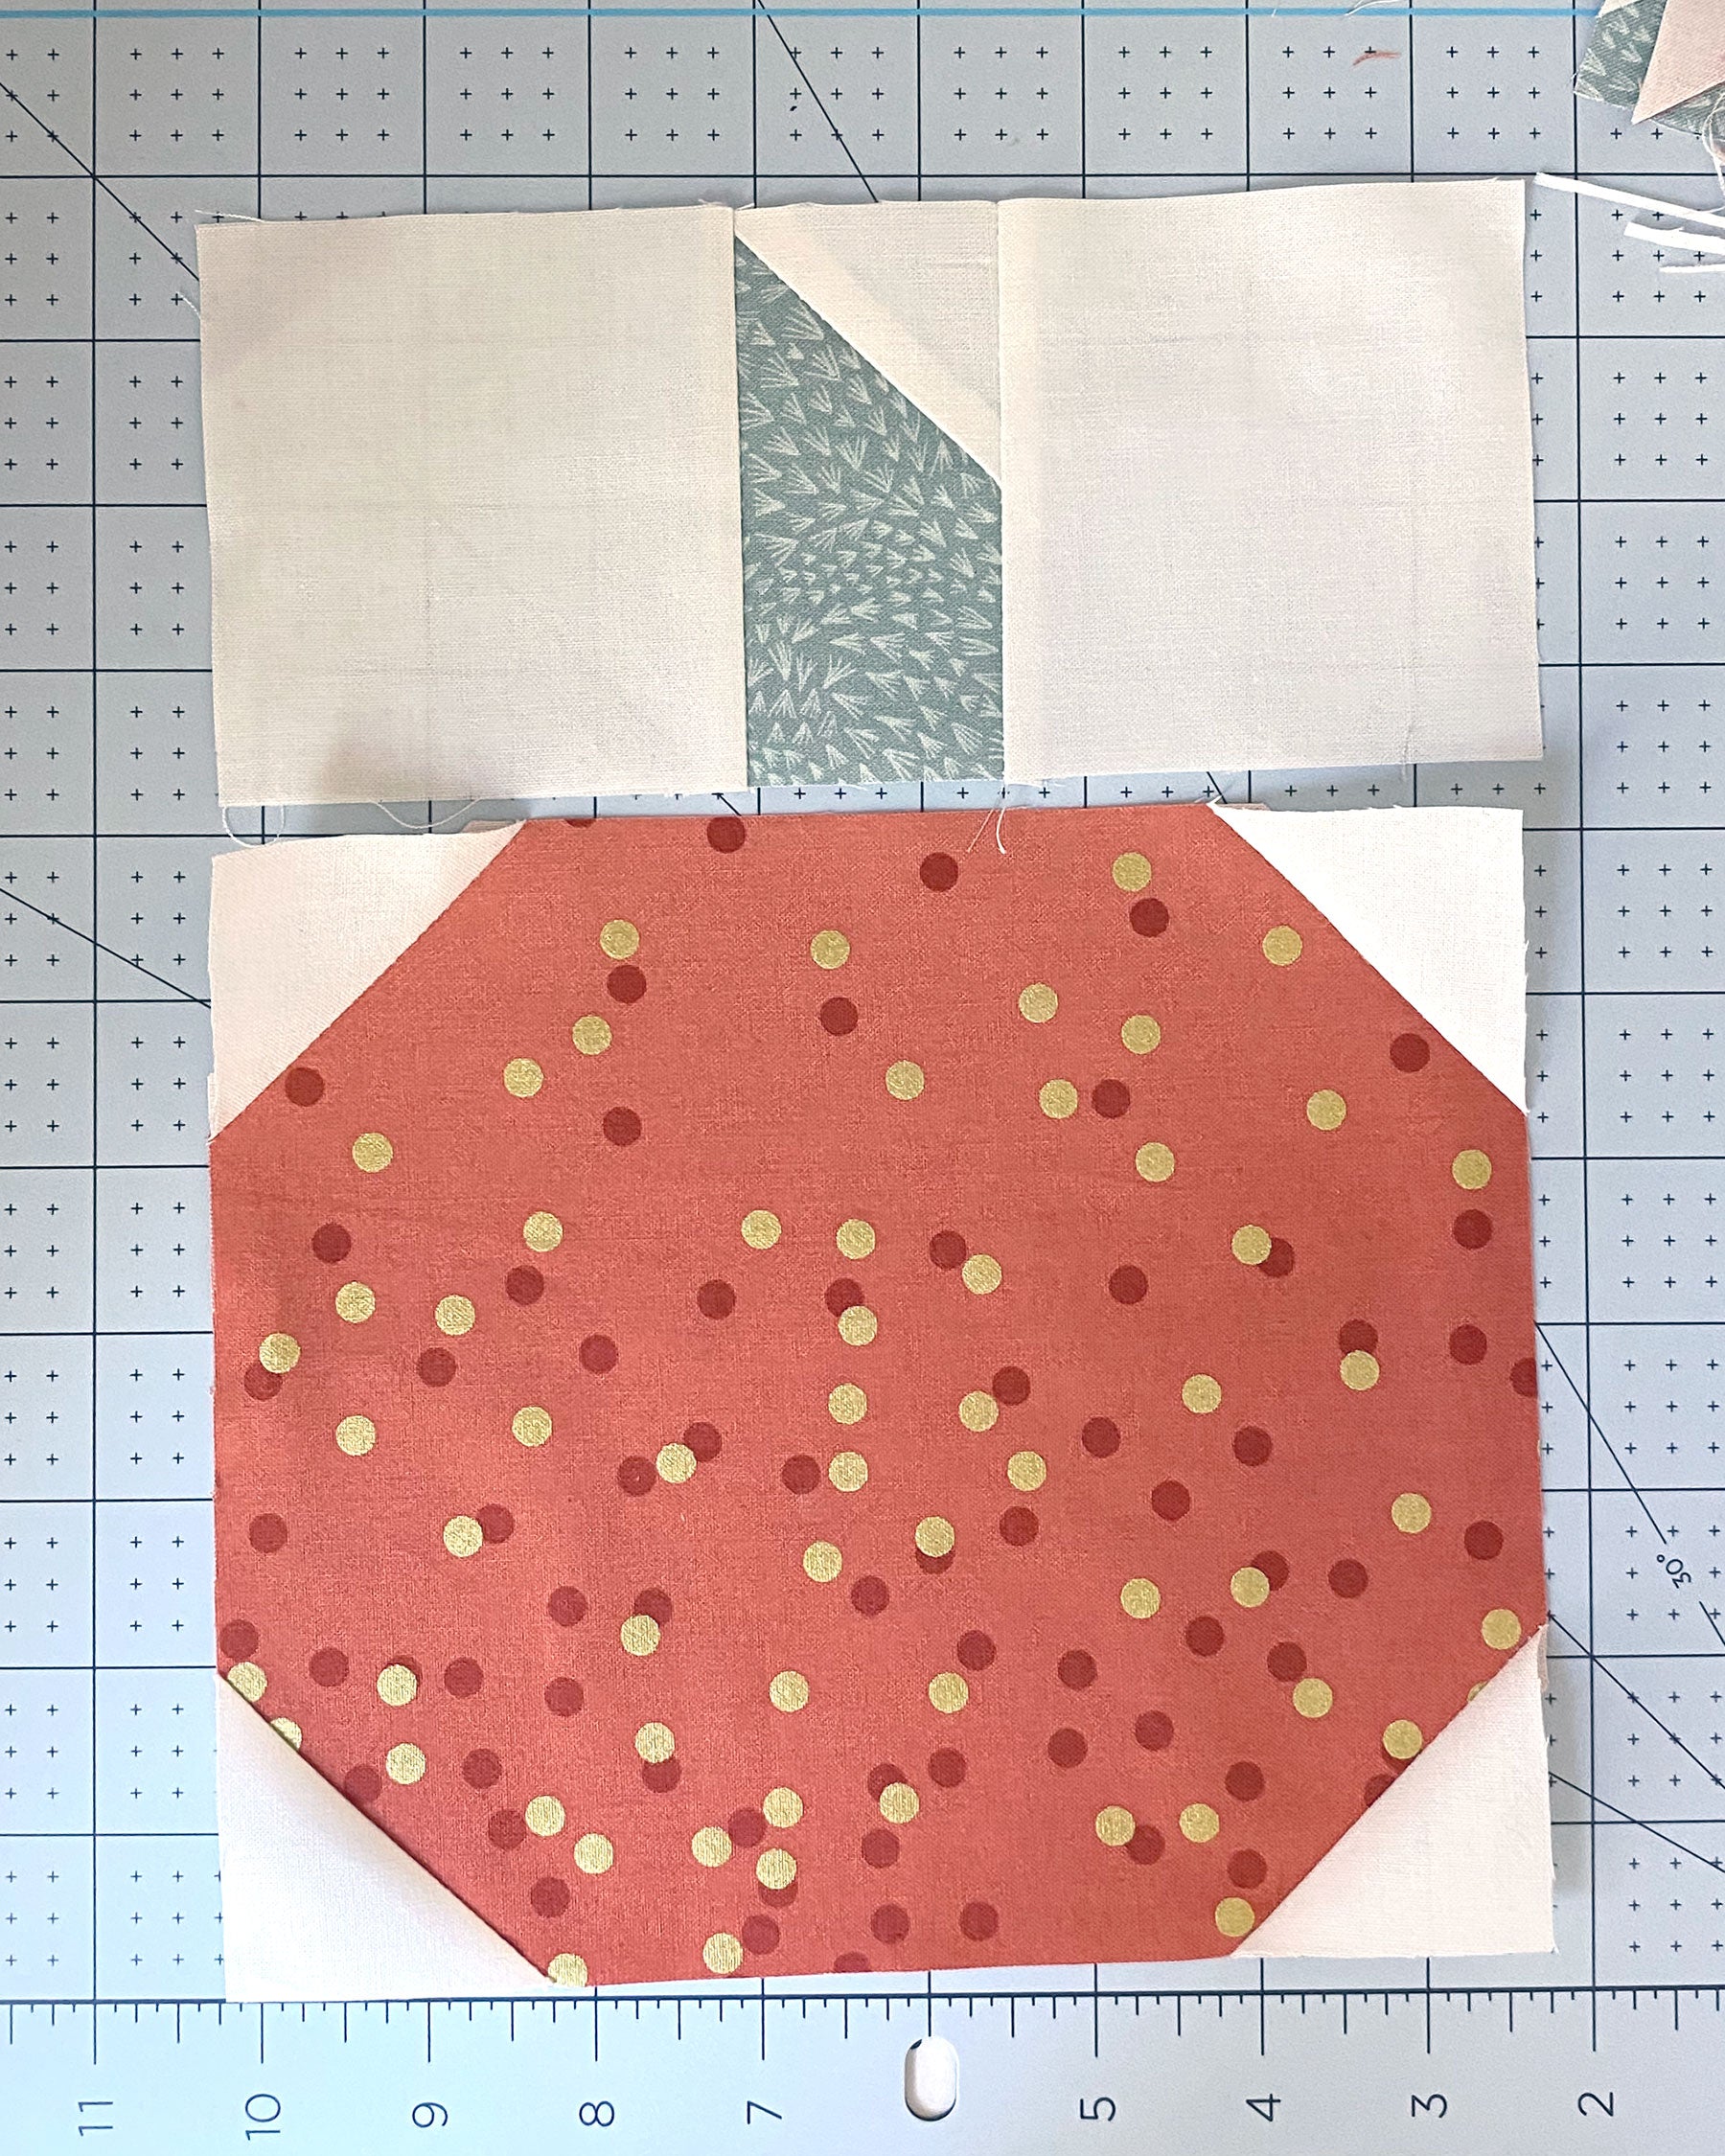 Pumpkin Quilt Block tutorial - sew top and bottom pieces together